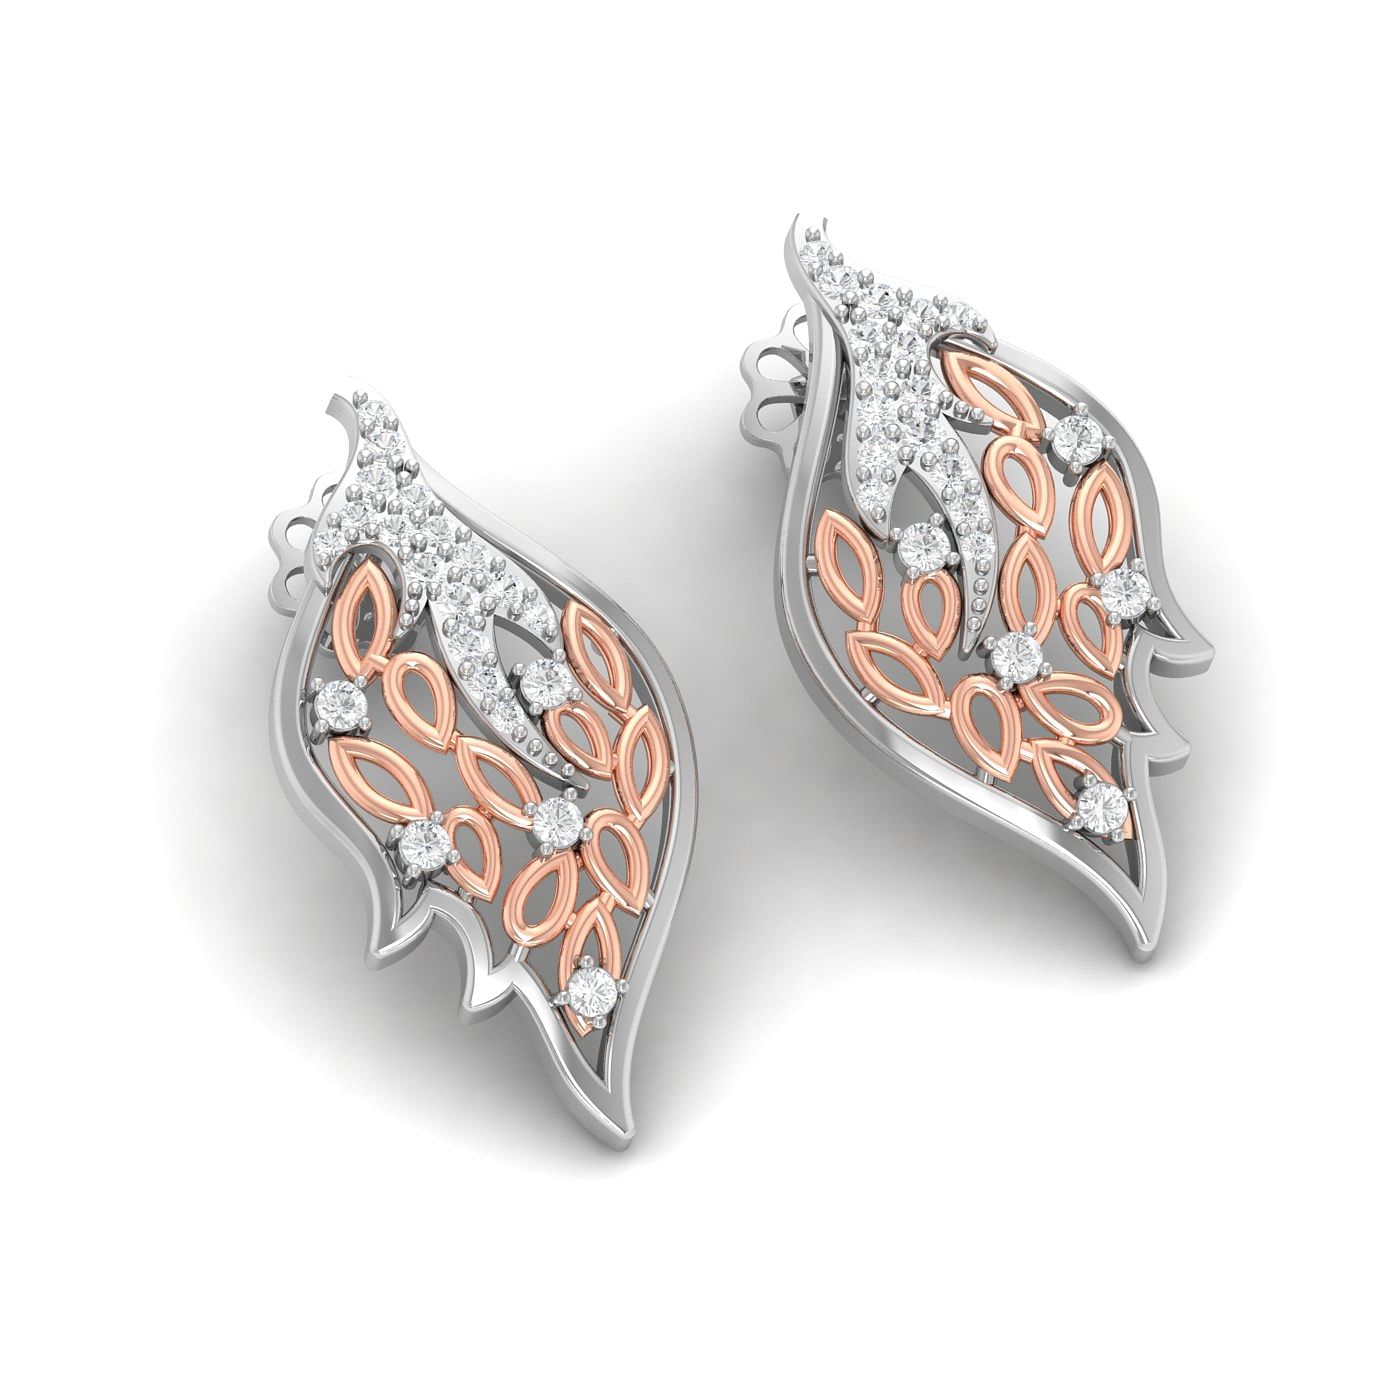 Leafy Design White Gold Diamond Earring For Daily Wear